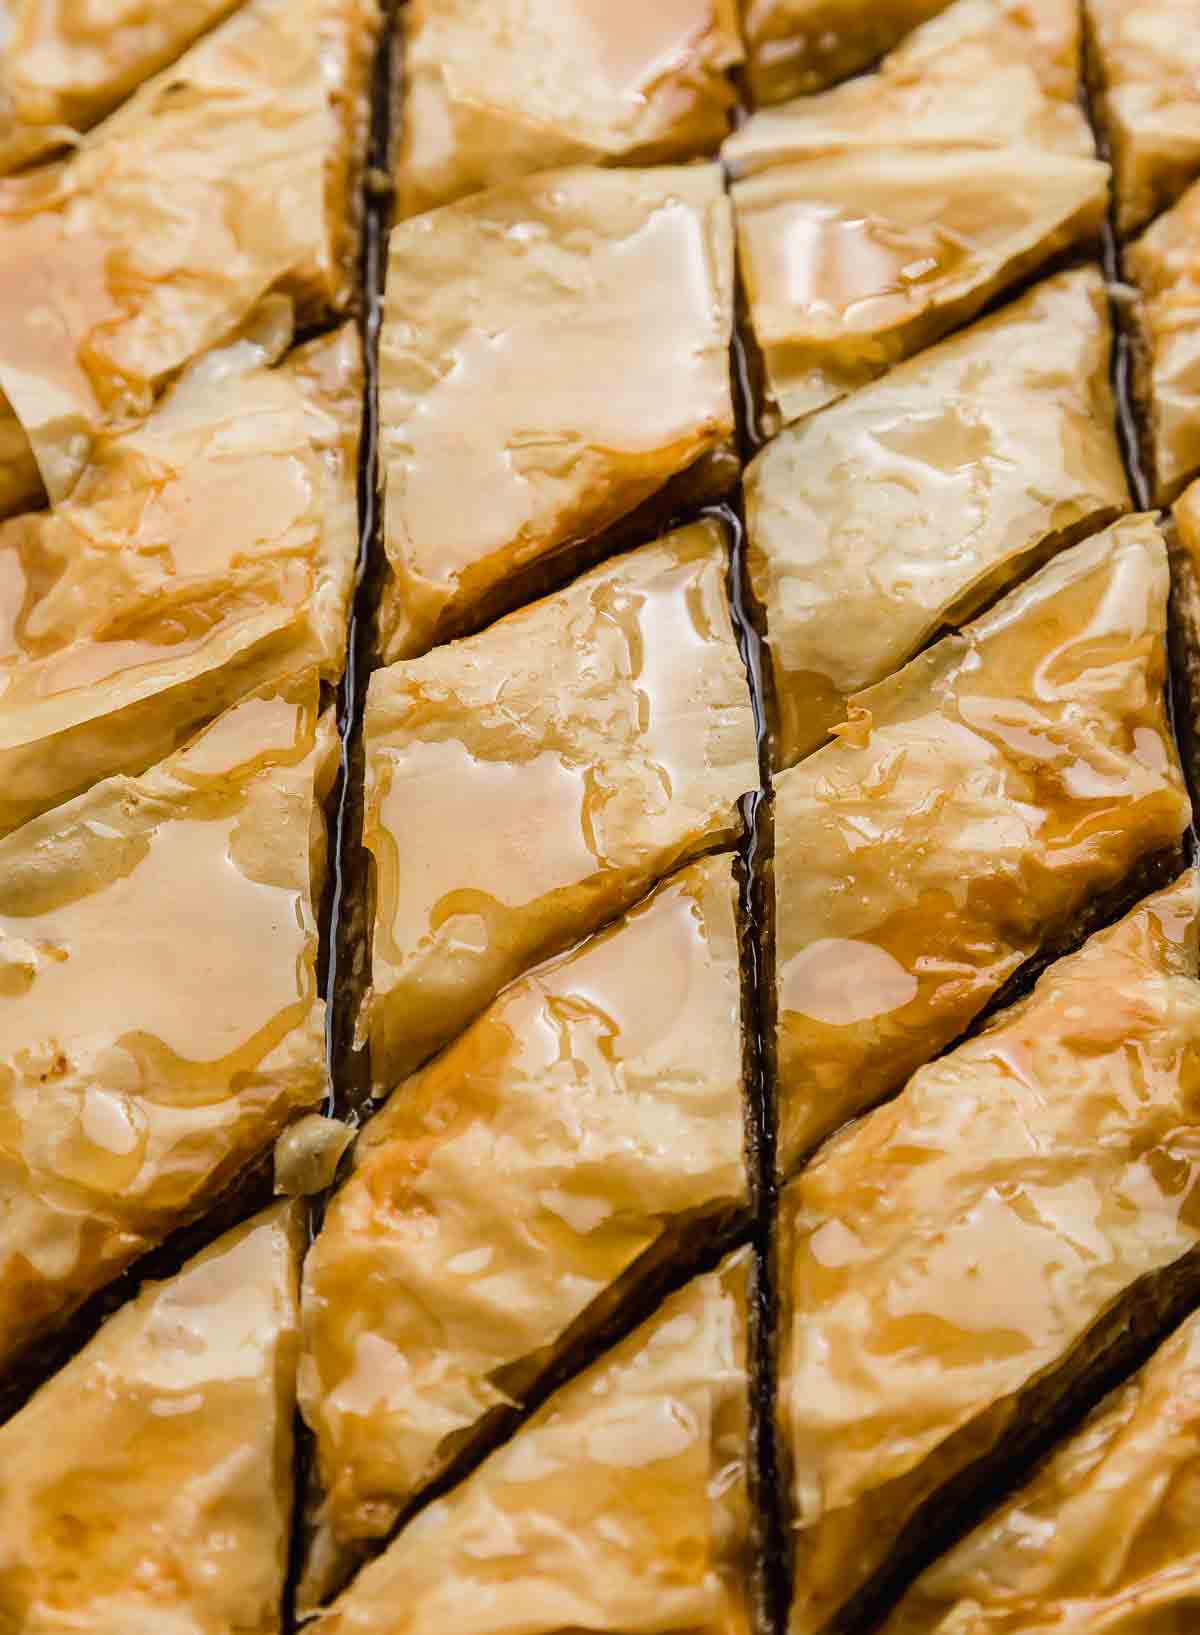 Honey syrup covered golden crispy baklava cut into diamond shapes in a pan.